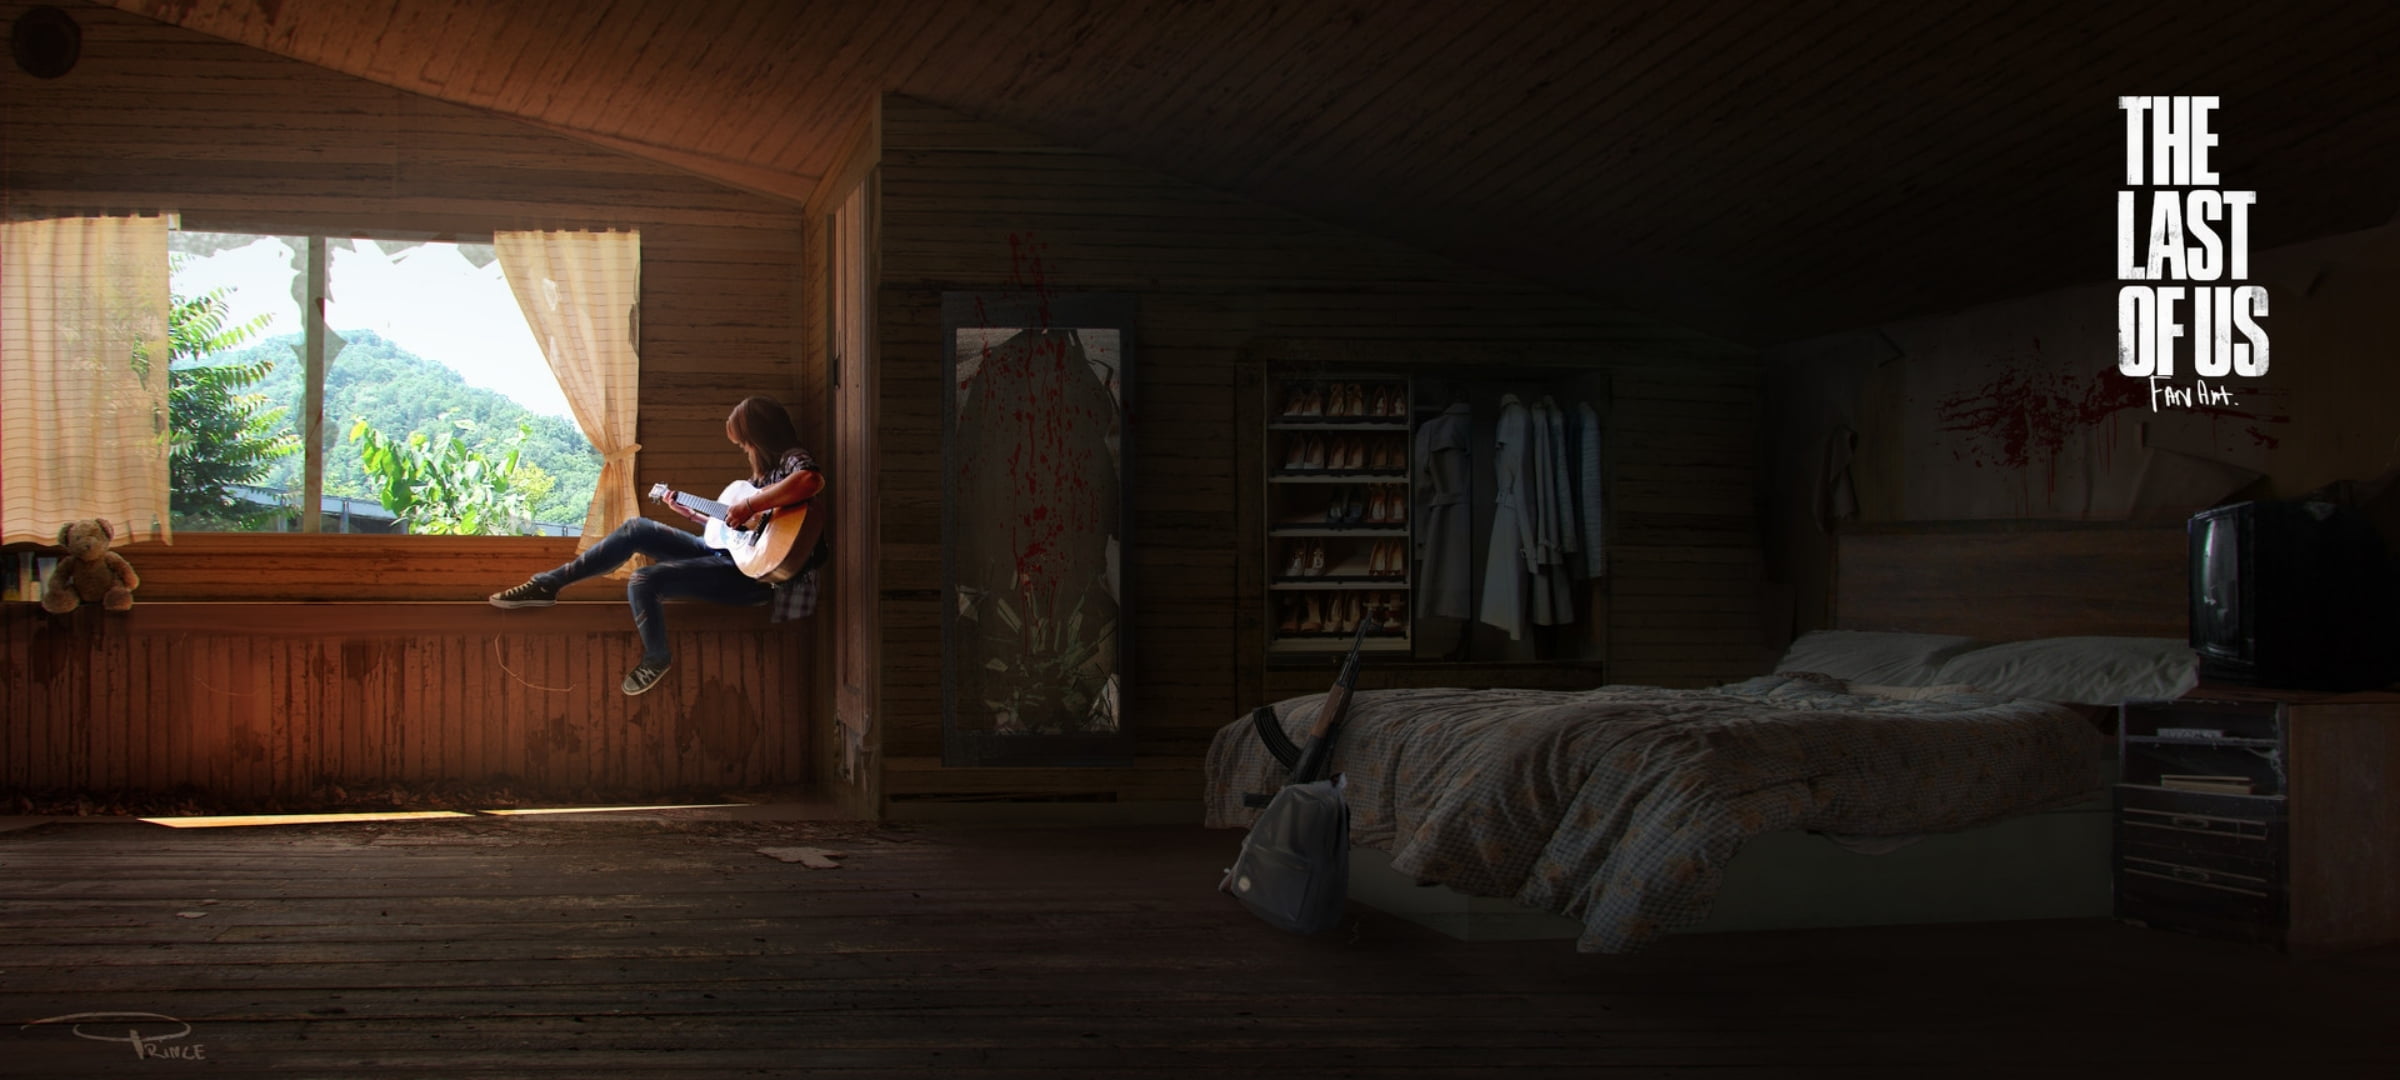 Ellie, Art, Game, Concept Art, The Last of Us, Naughty Dog